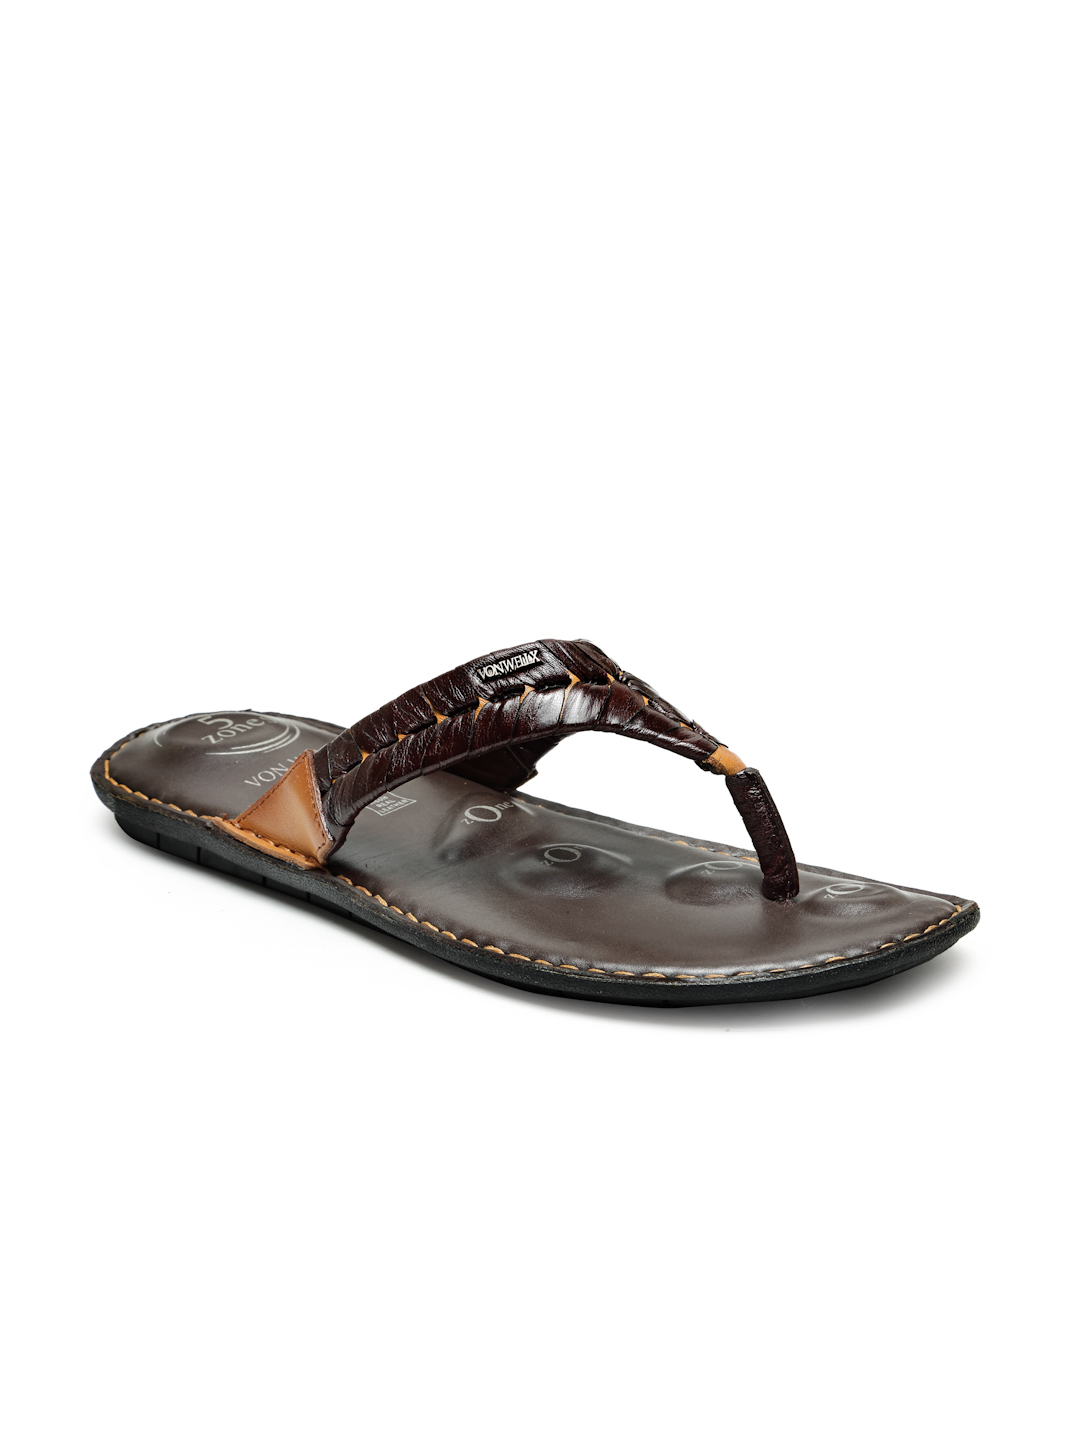 Buy Von Wellx Germany Comfort Men's Tan Slippers Alonso Online in Faridabad